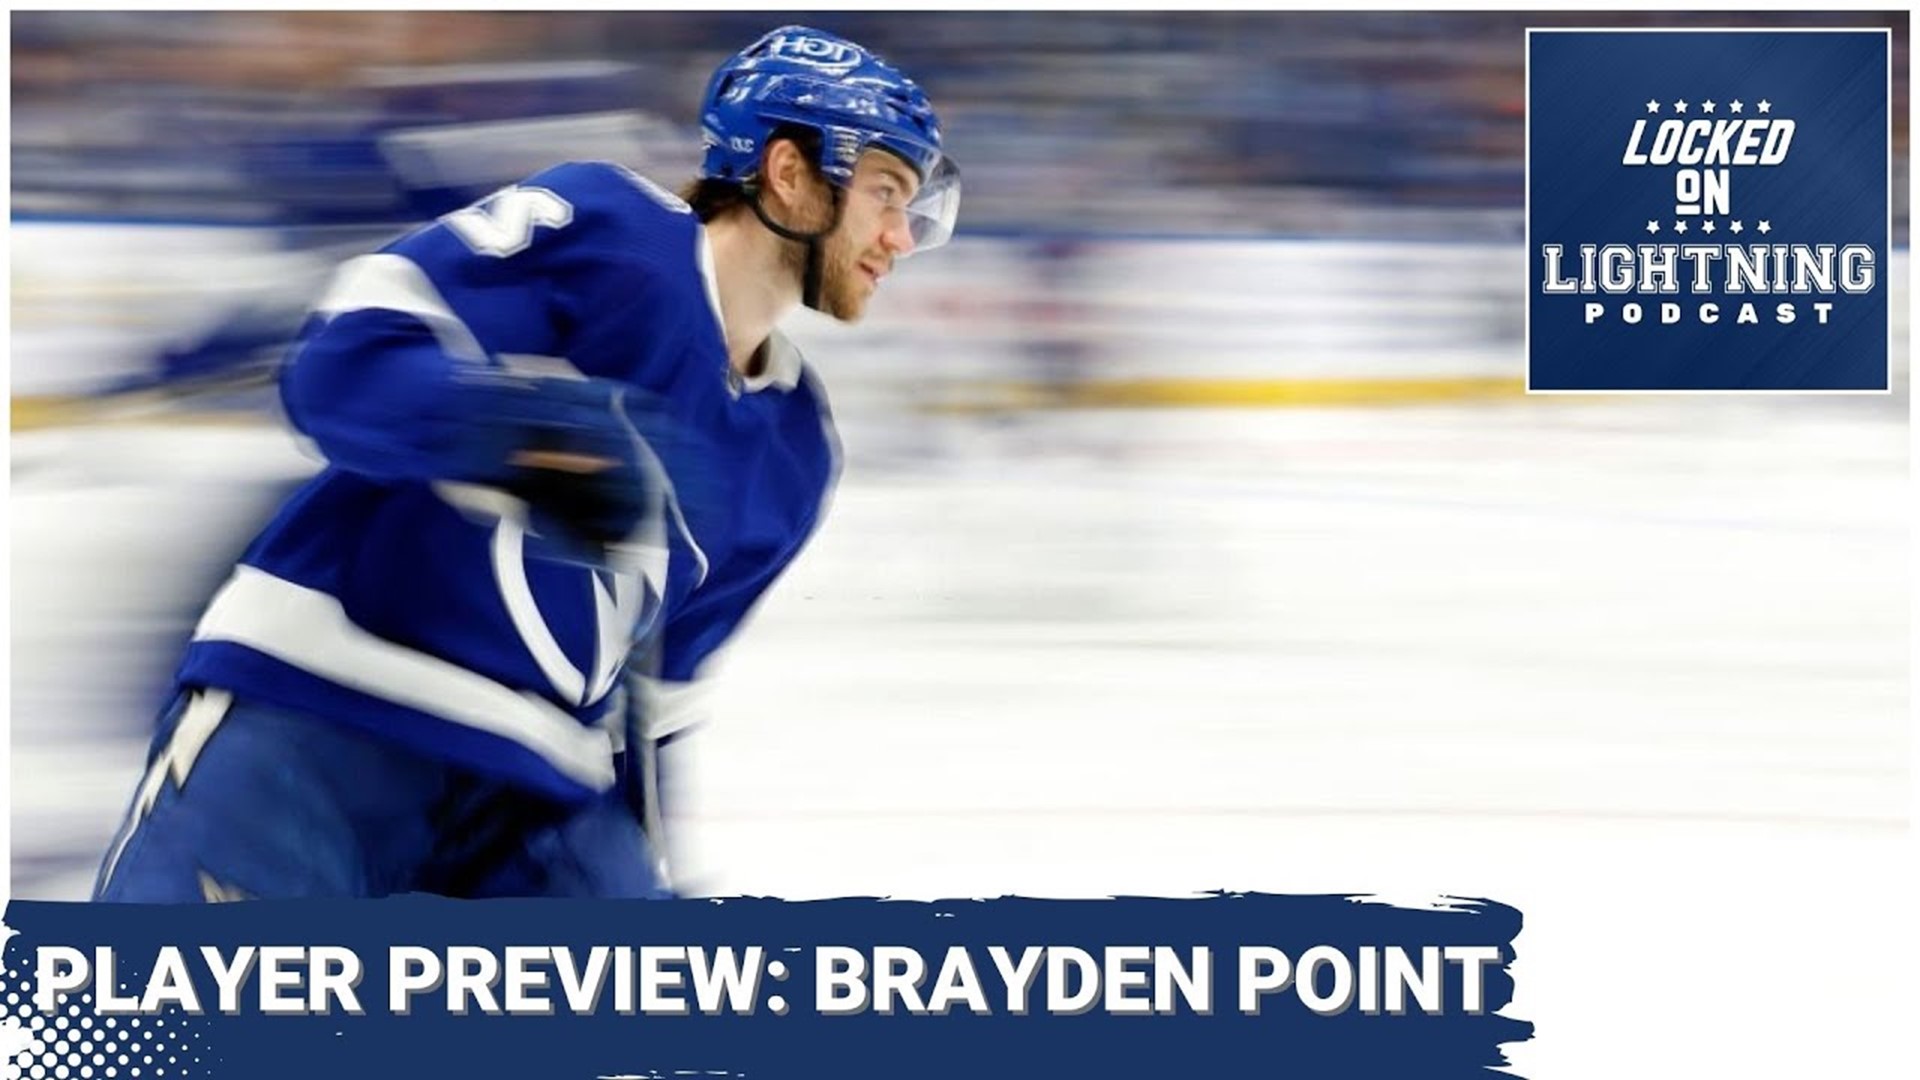 Today we discuss Brayden Point and how he could be better than his 2022 campaign. Adam believes the Bolts veteran forward can eclipse his career highs in points